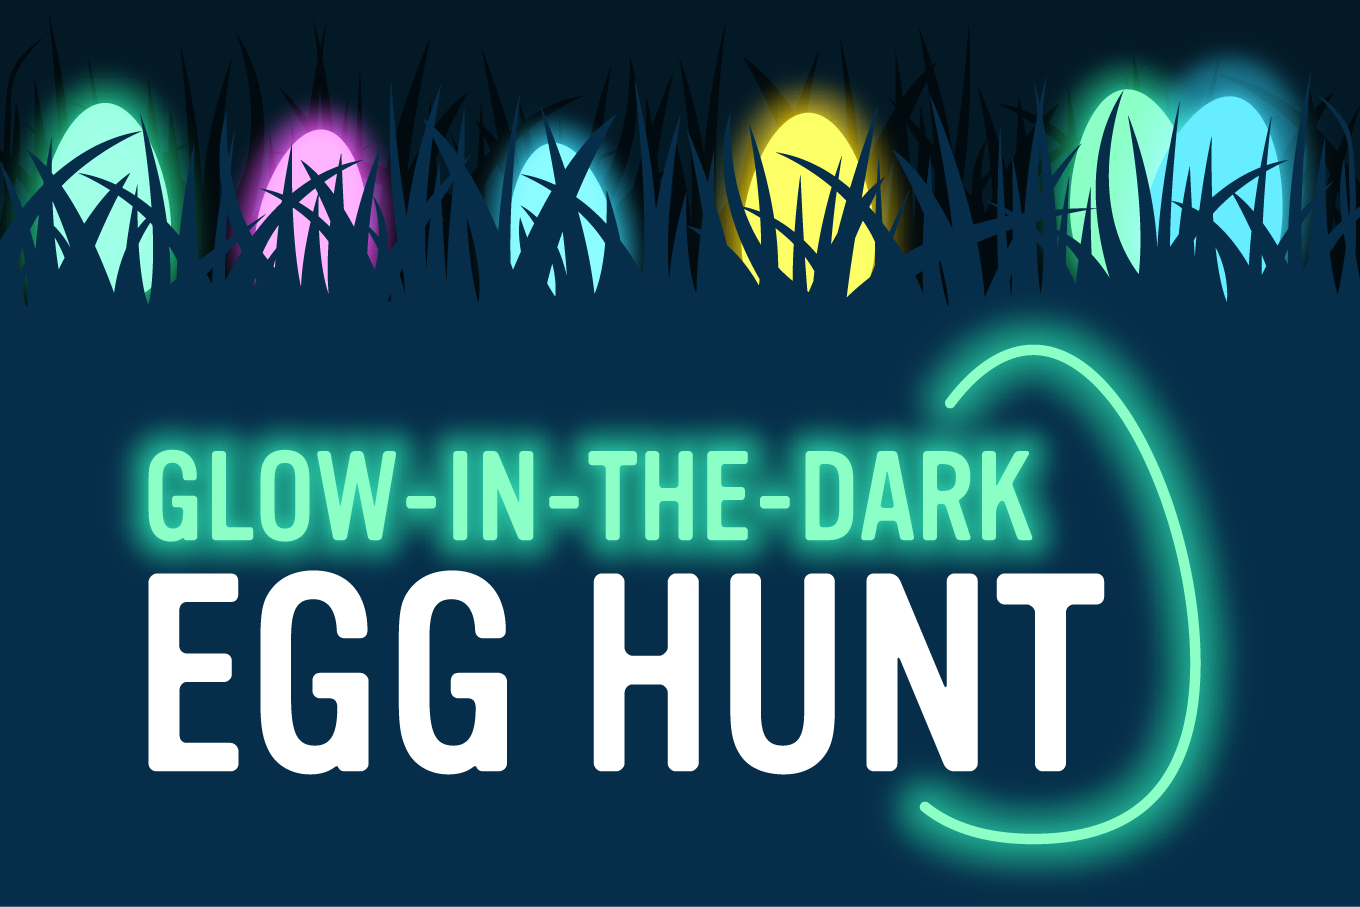 Maryland Zoo to Host a Glow-in-the-Dark Egg Hunt Just For Adults! | The Maryland Zoo